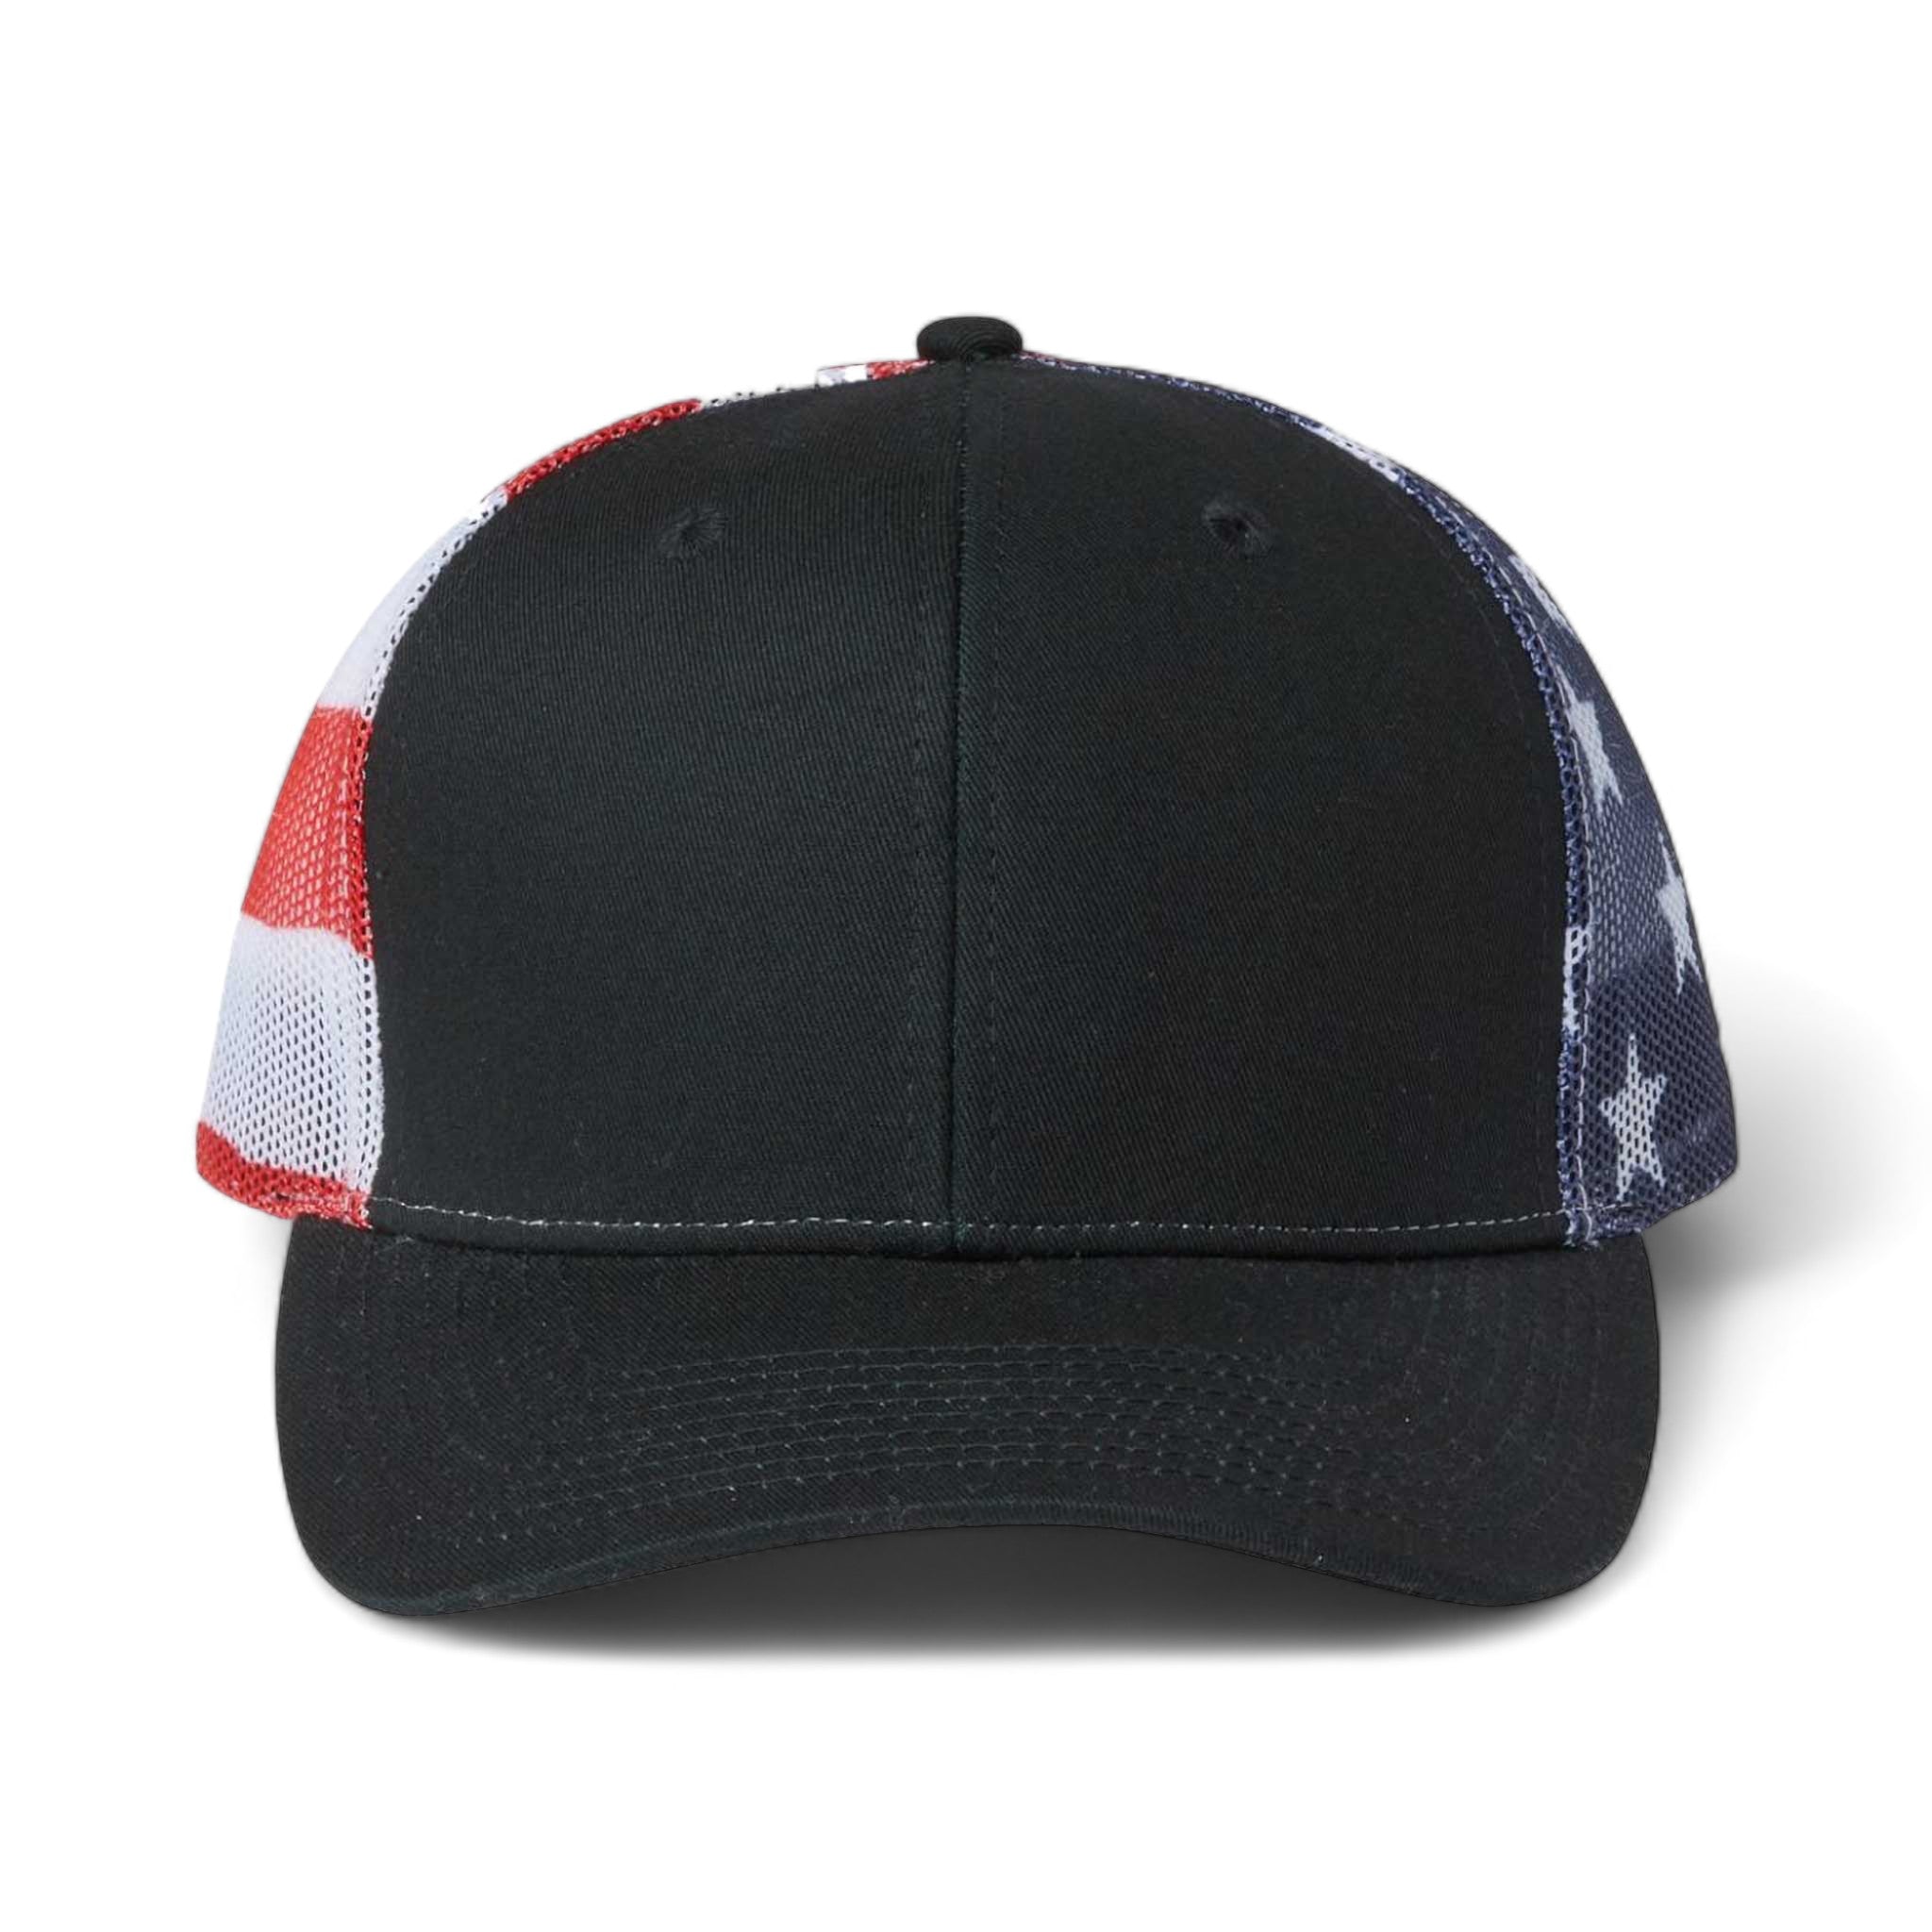 Front view of Kati S700M custom hat in black and usa flag